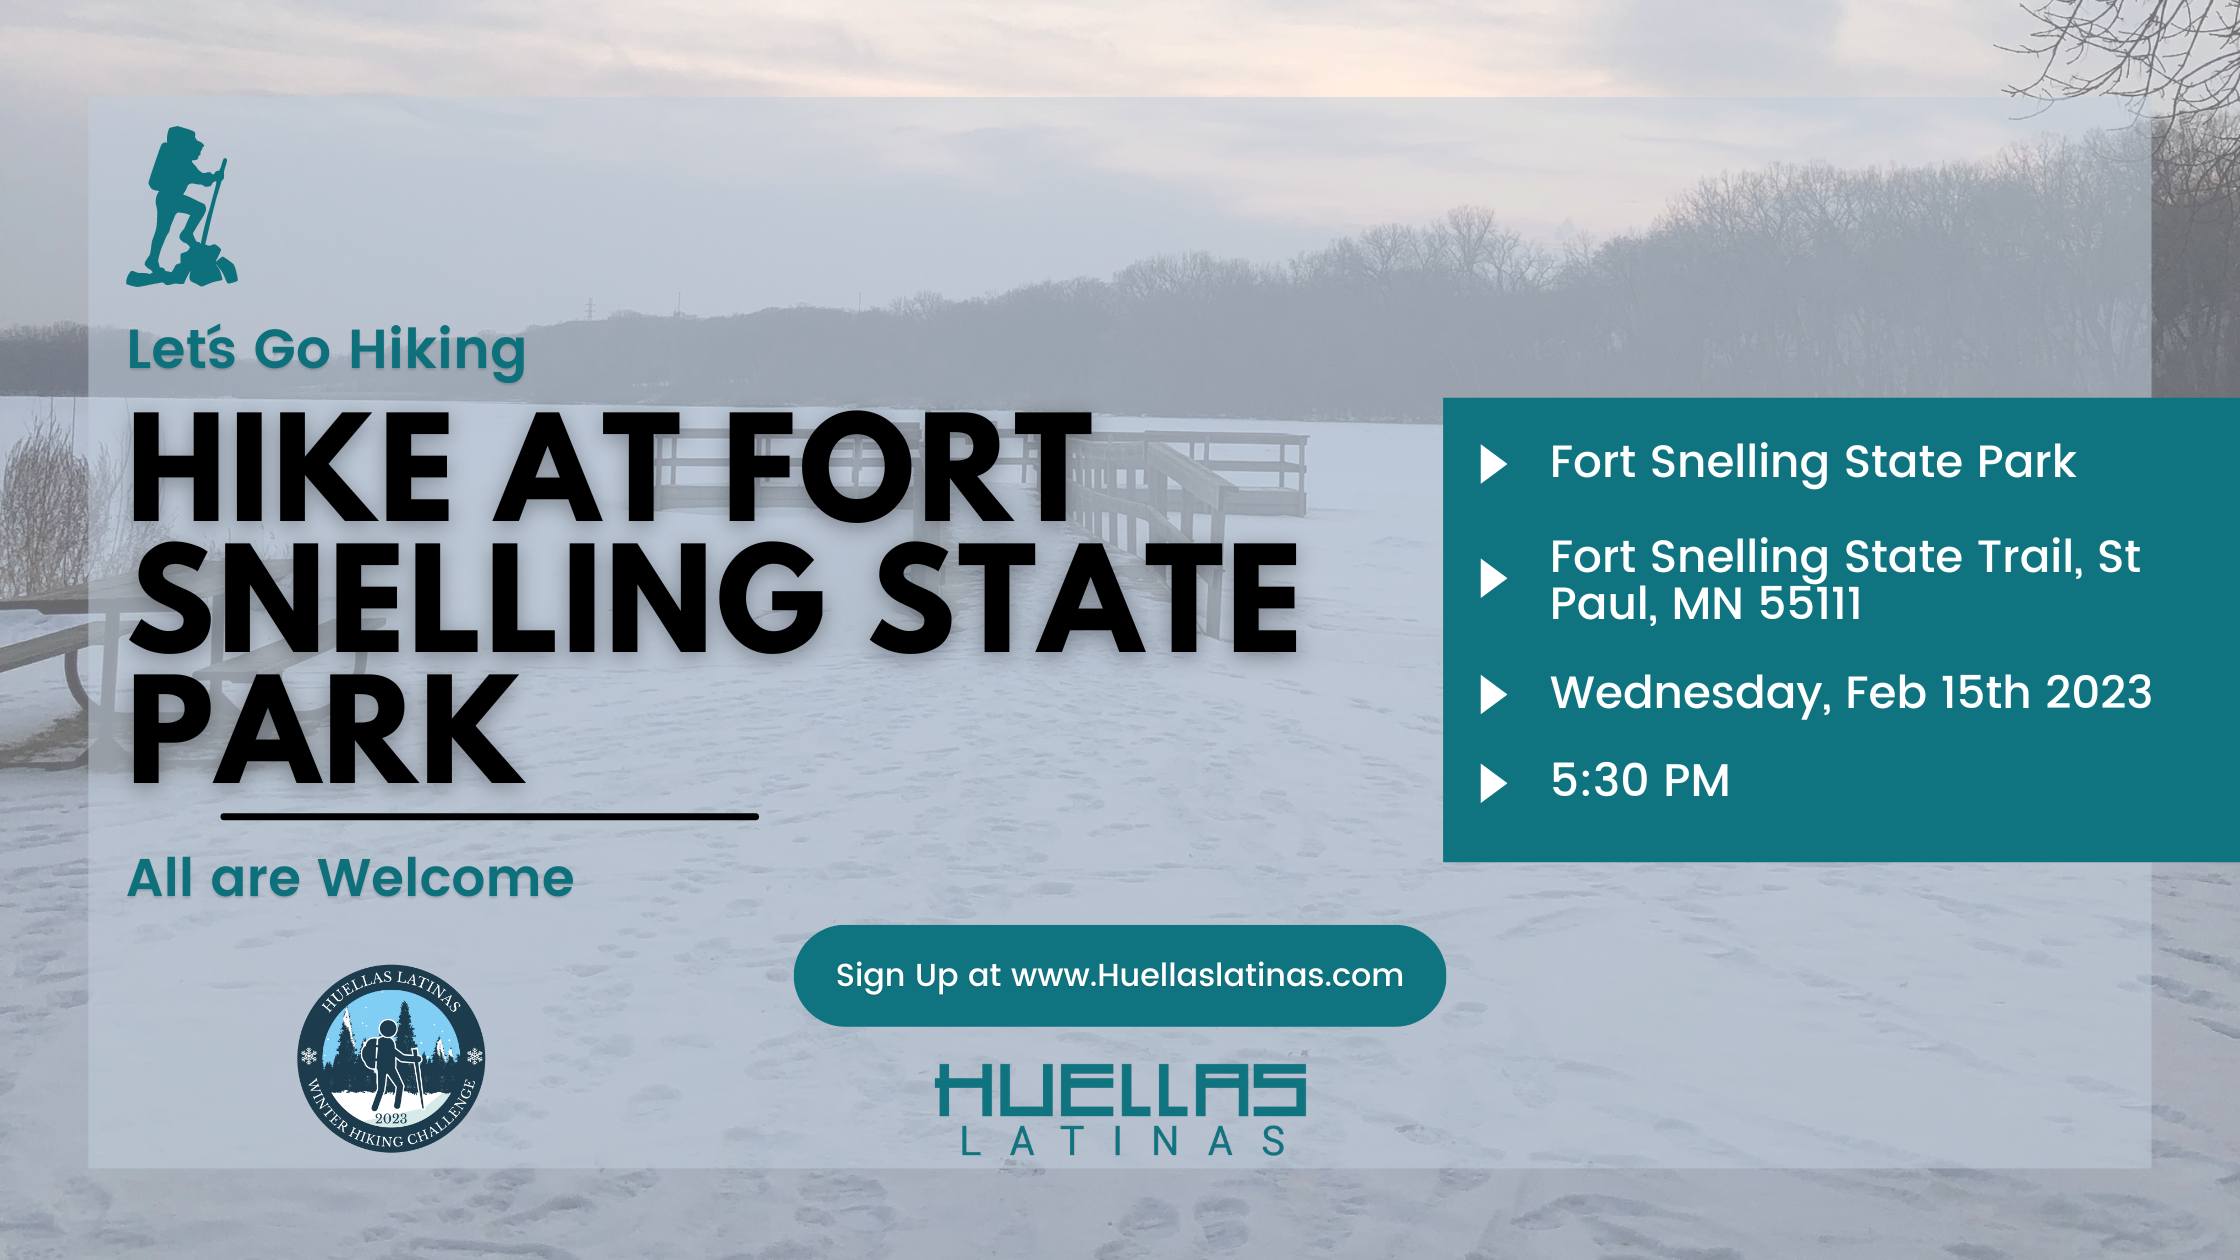 Hike at Fort Snelling State Park